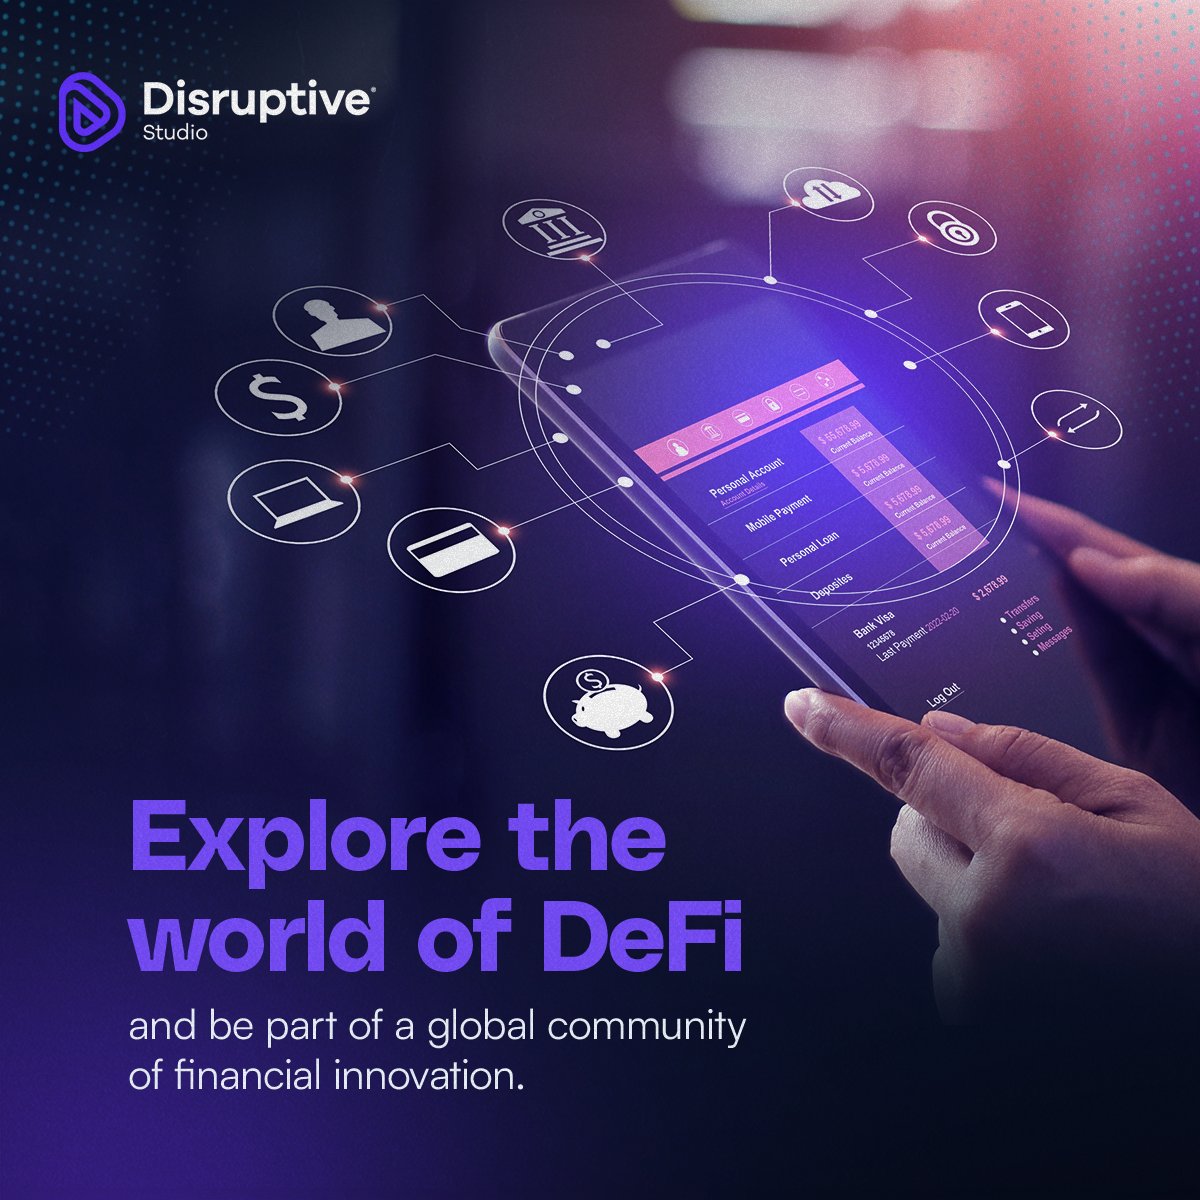 Access the global financial market with DeFi! Enter from anywhere in the world, participate in global projects. 
Don't let borders limit you! 🌍✨ 
#DeFi #GlobalAccess #CryptoRevolution